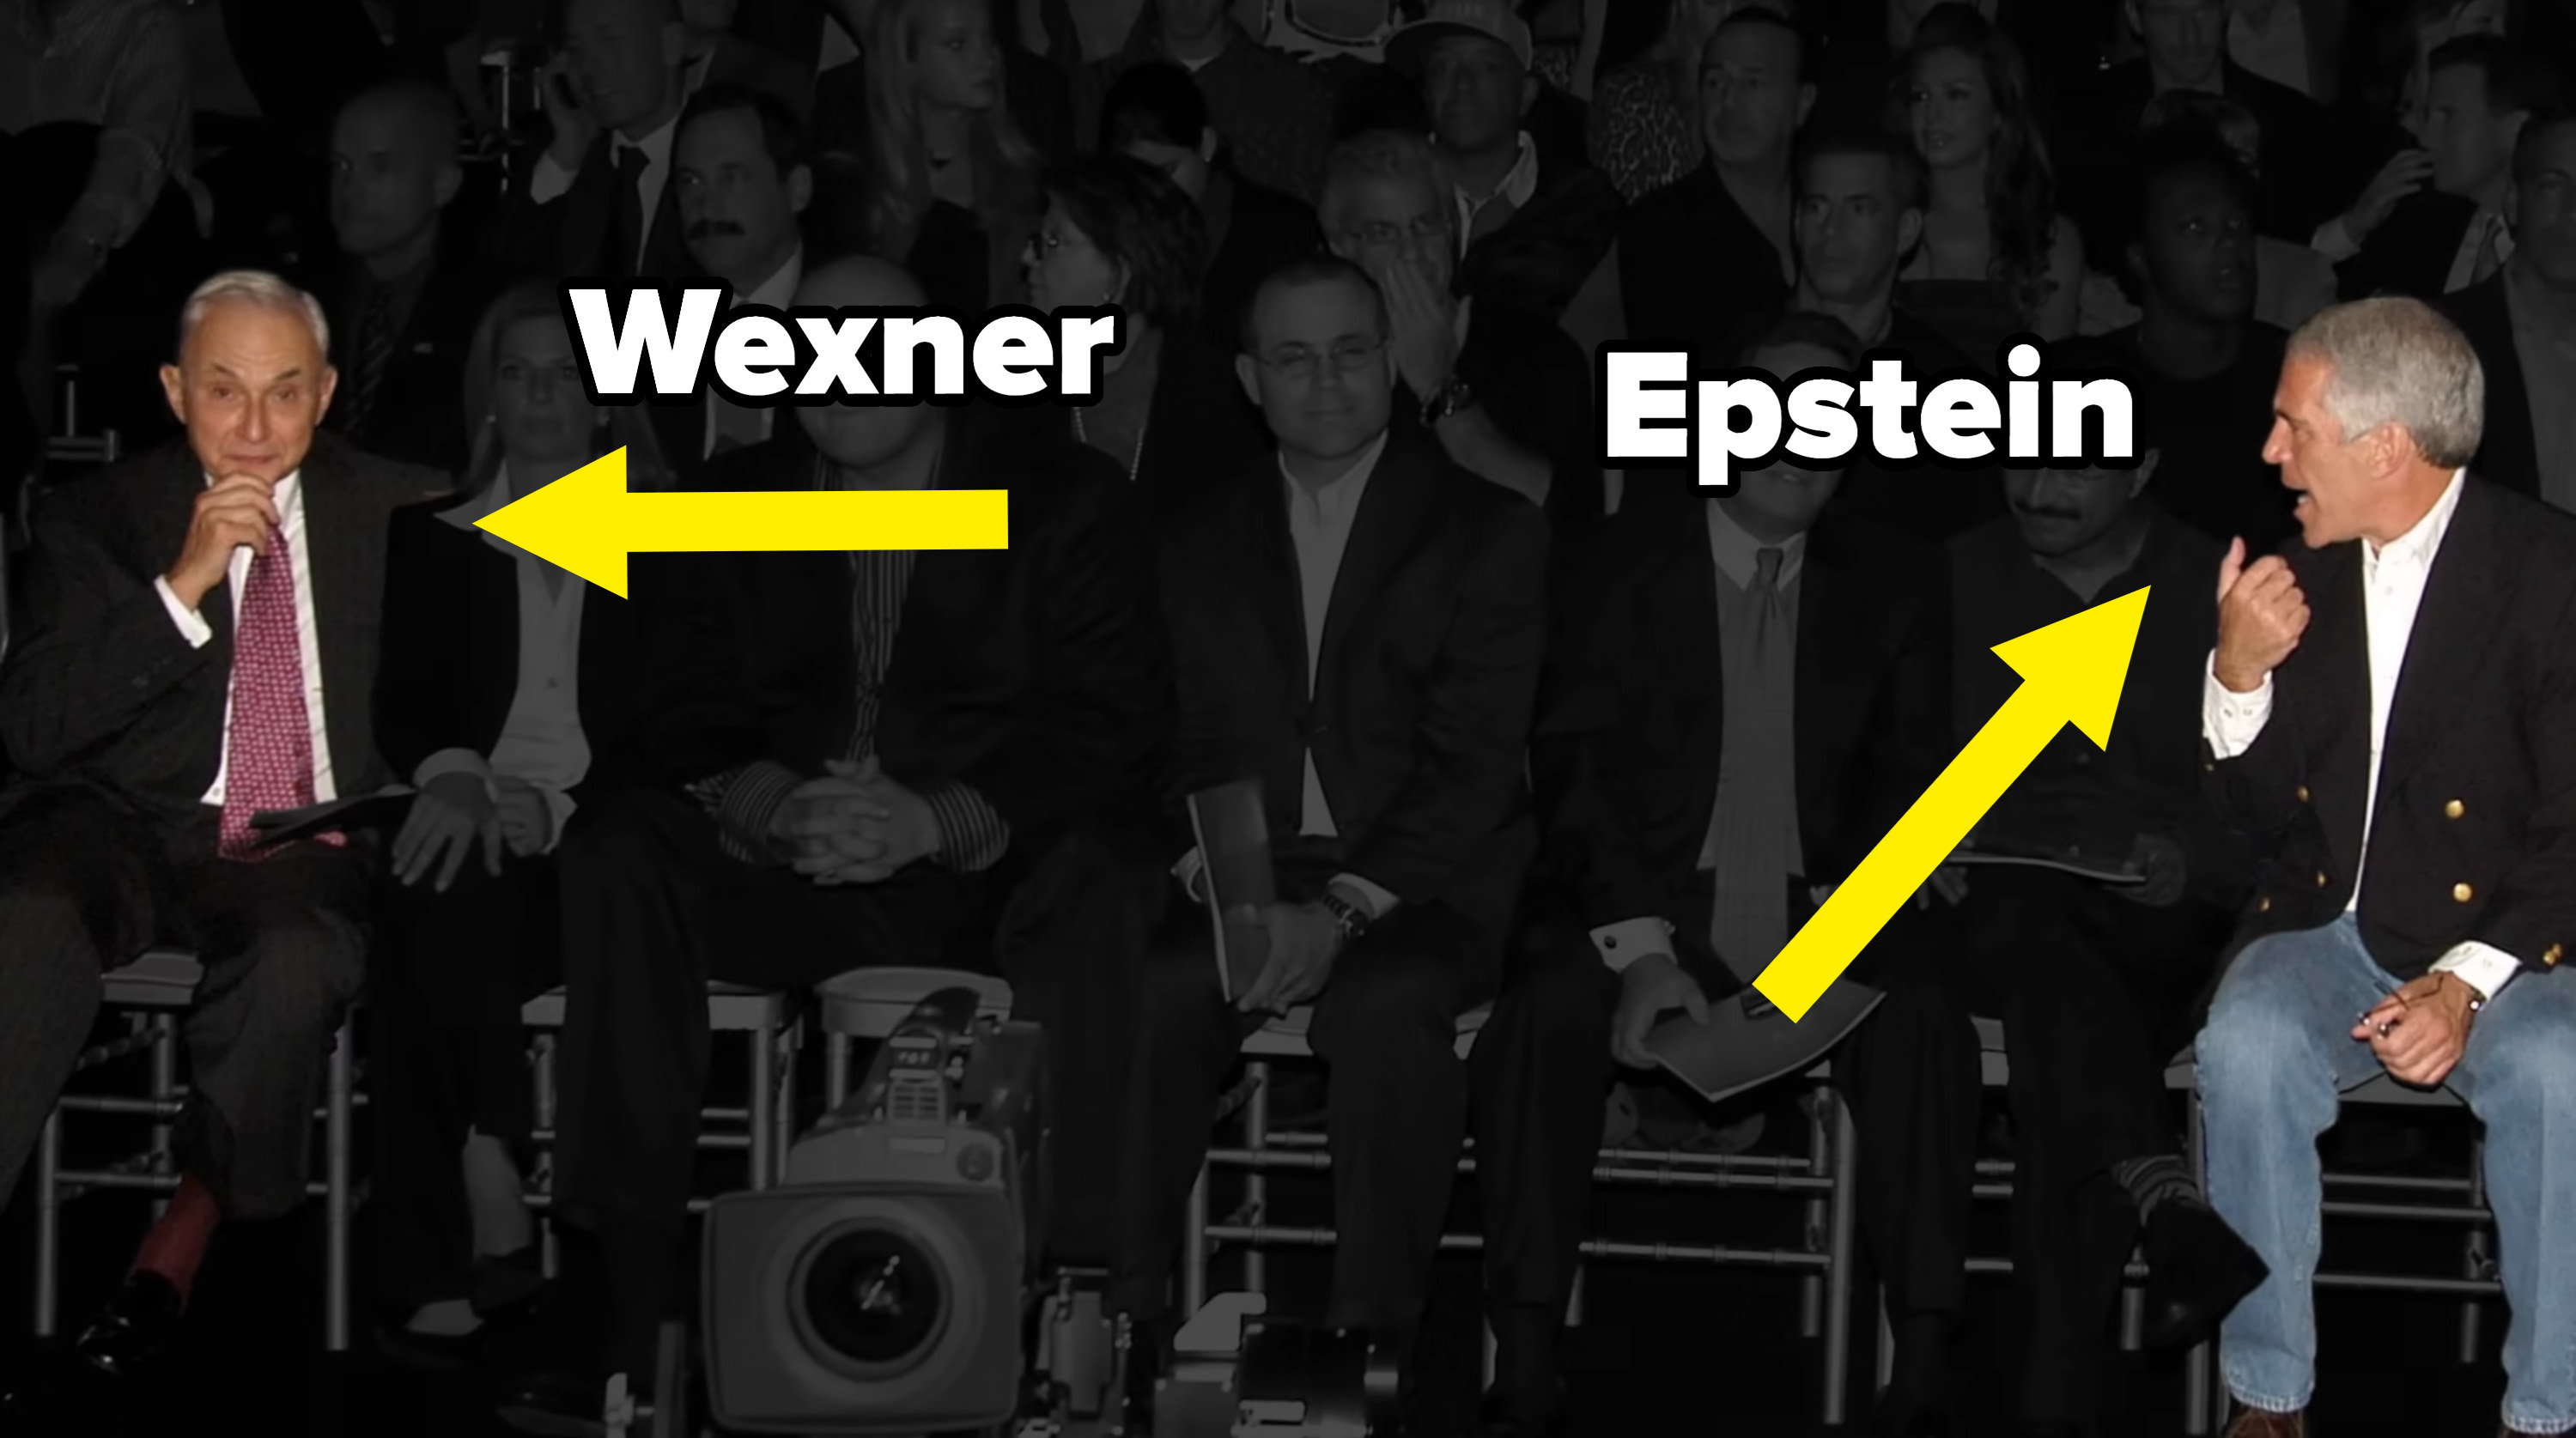 A screenshot from the documentary, showing Wexner and Epstein seated near each other at an event